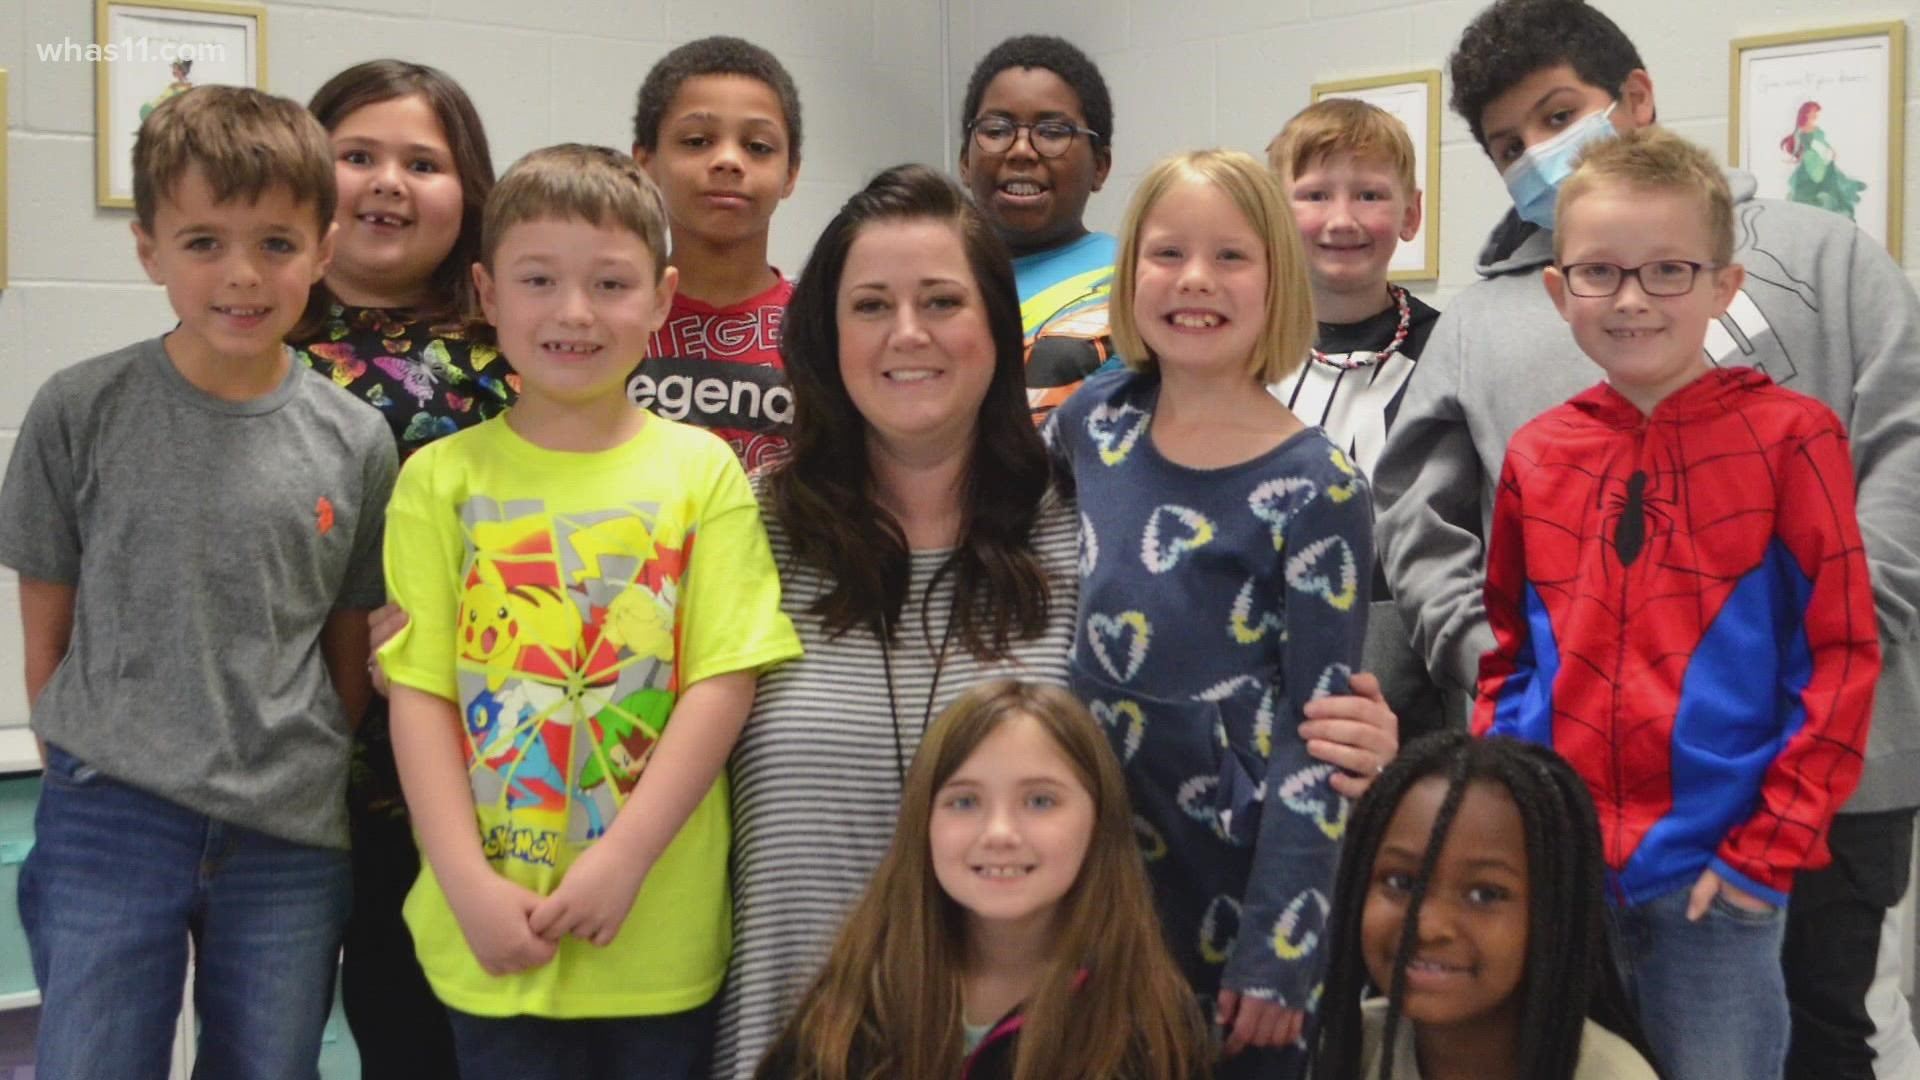 Amelia Nethery is the first teacher from Heartland Elementary to receive the ExCel Award.